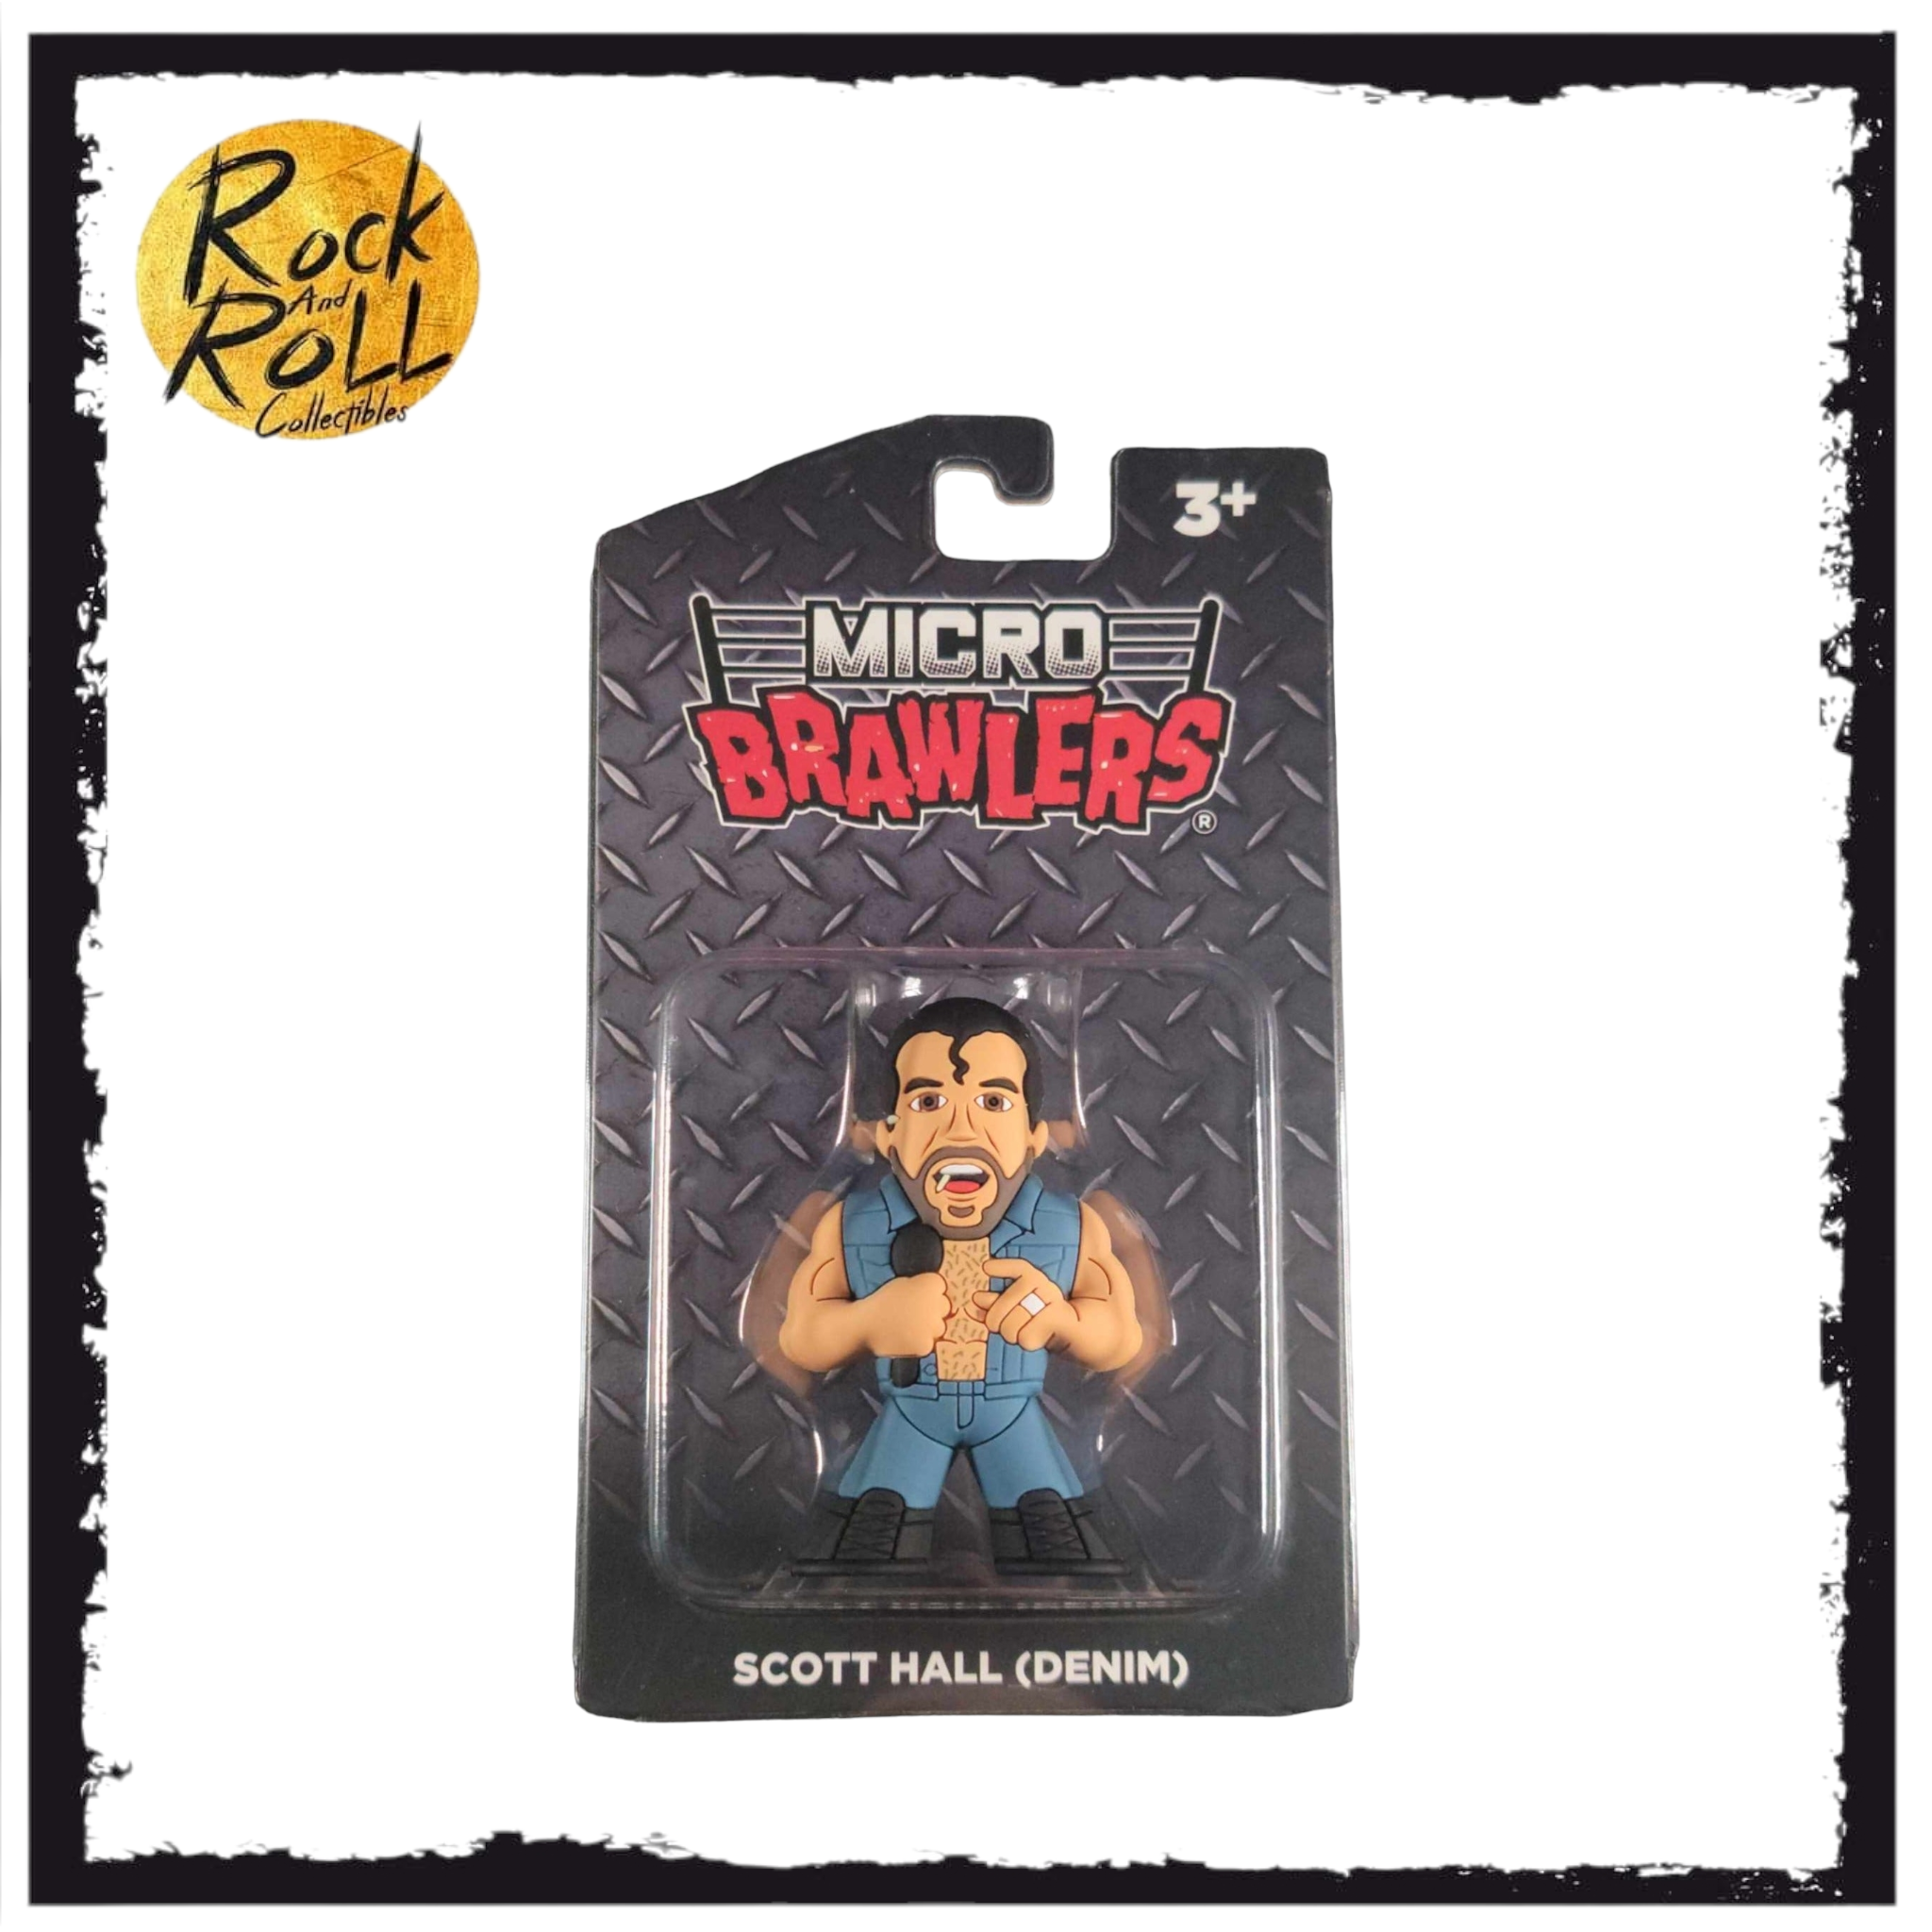 Micro Brawlers - Scott Hall (Denim) Pro Wrestling Crate – rock and roll  collectibles